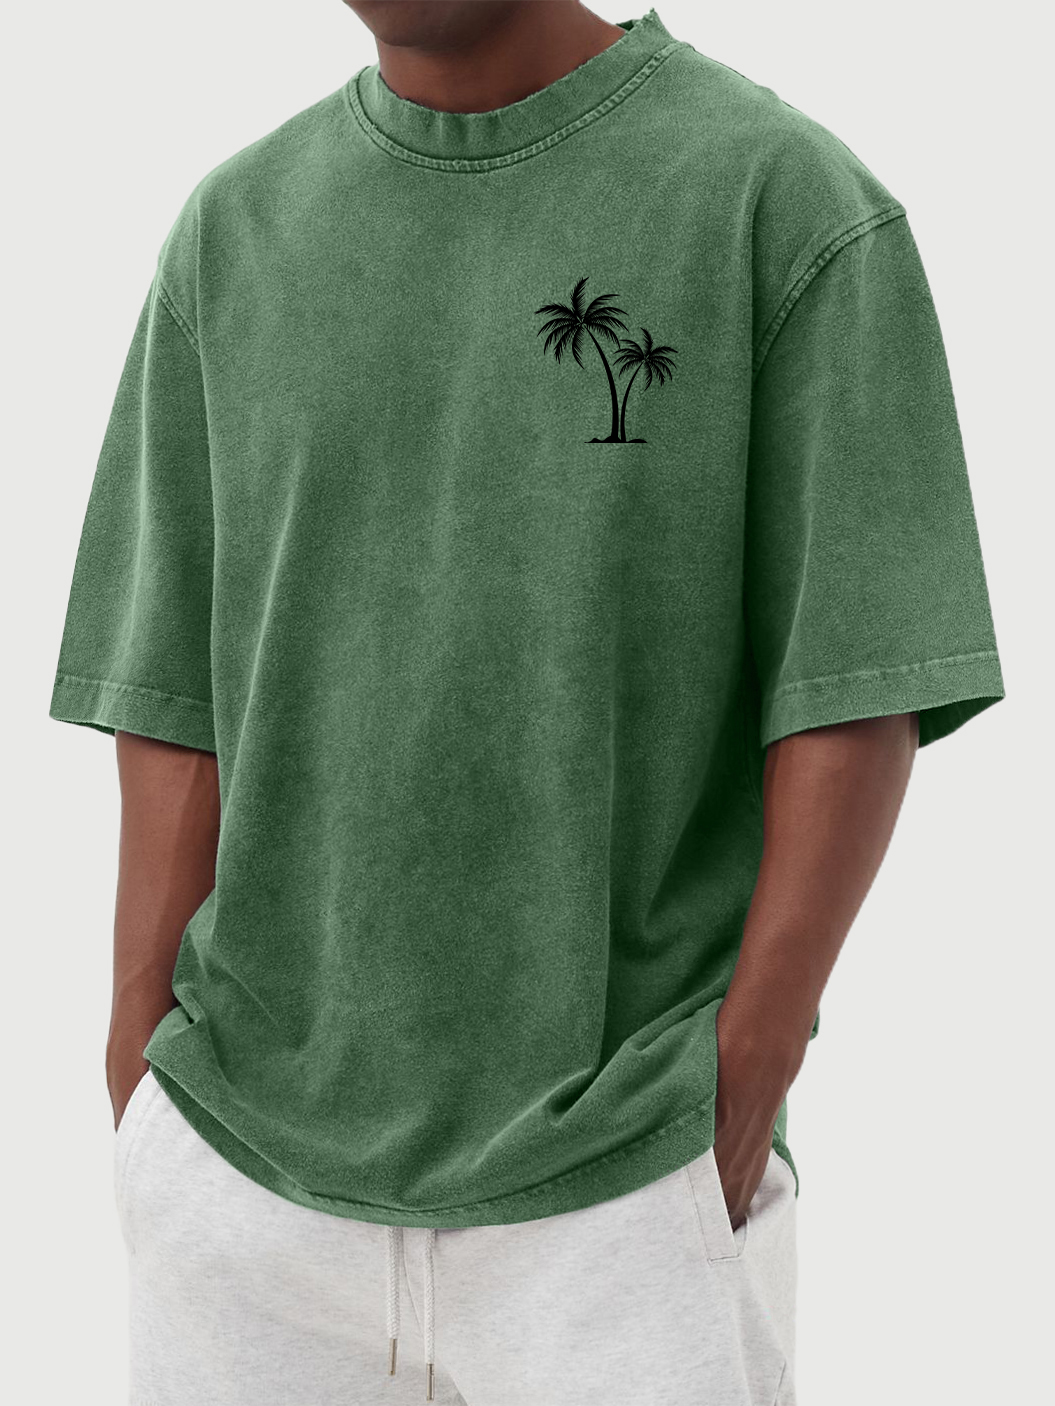  Men's Vintage Washed Cotton Palm Tree Print Short Sleeved Round Neck T-shirts